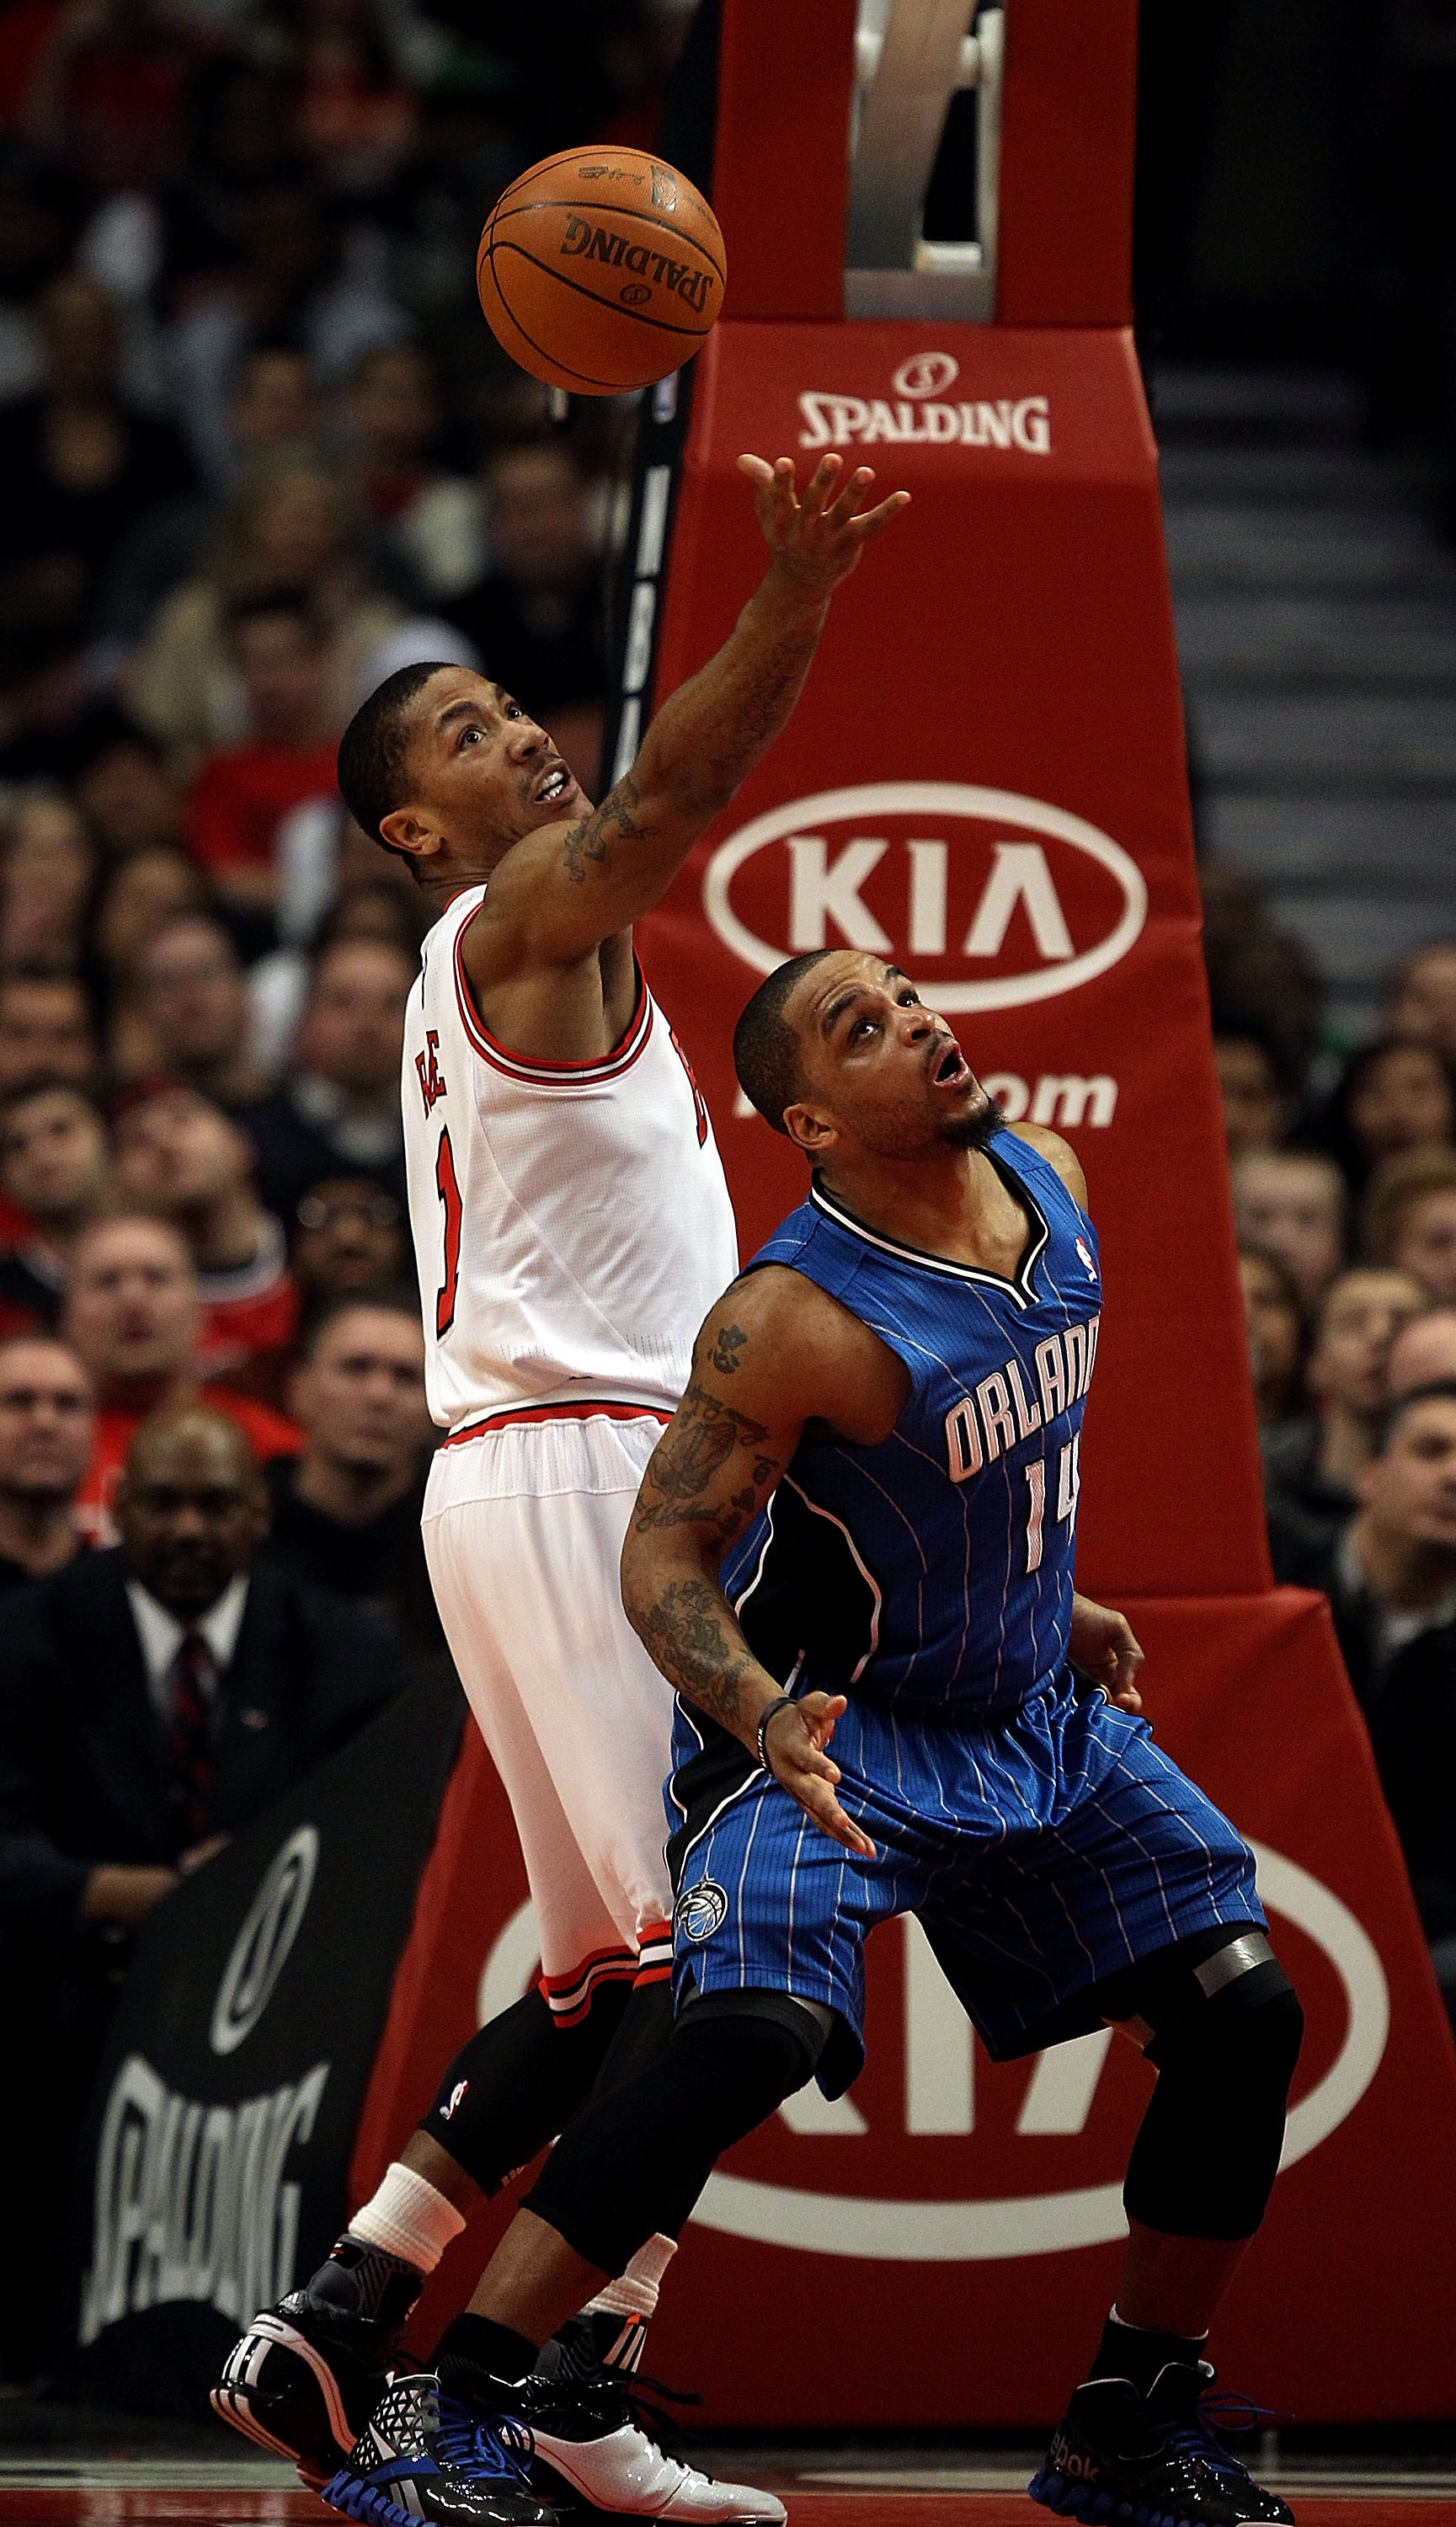 CHICAGO, IL - JANUARY 28: Derrick Rose #1 of the Chicago Bulls reaches for the ball over Jameer Nelson #14 of the Orlando Magic at the United Center on January 28, 2011 in Chicago, Illinois. NOTE TO USER: User expressly acknowledges and agrees that, by do